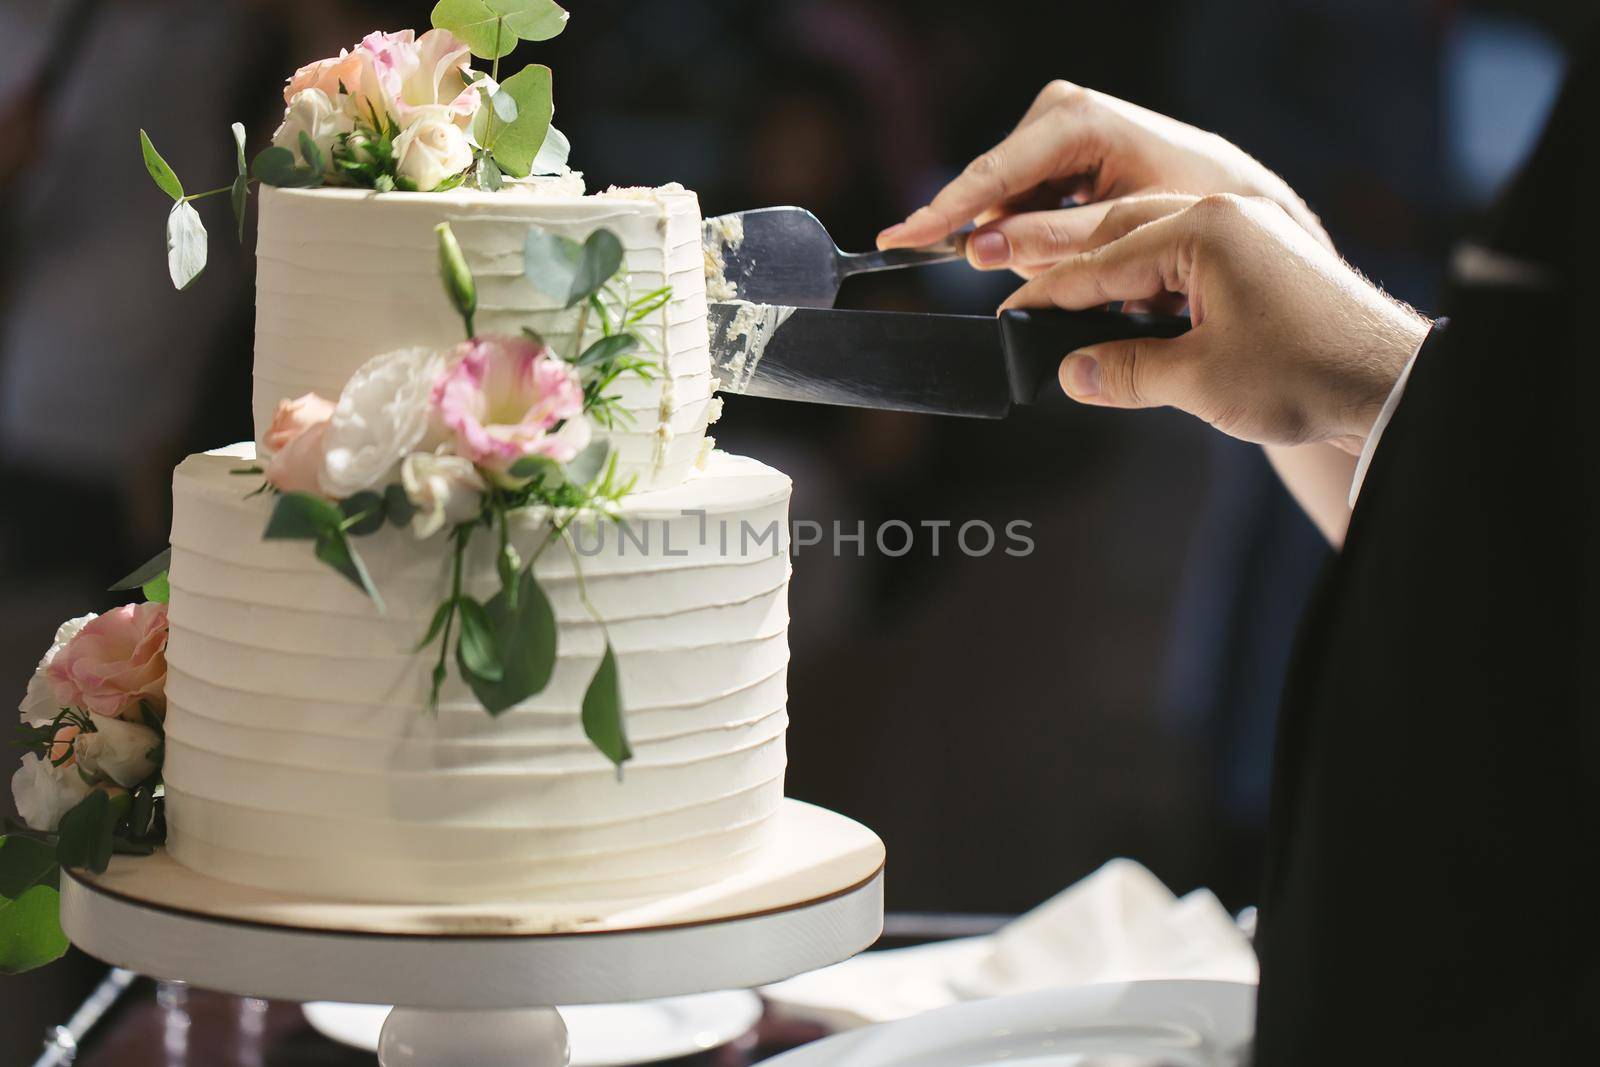 The bride and groom cut a gorgeous wedding cake at a banquet.